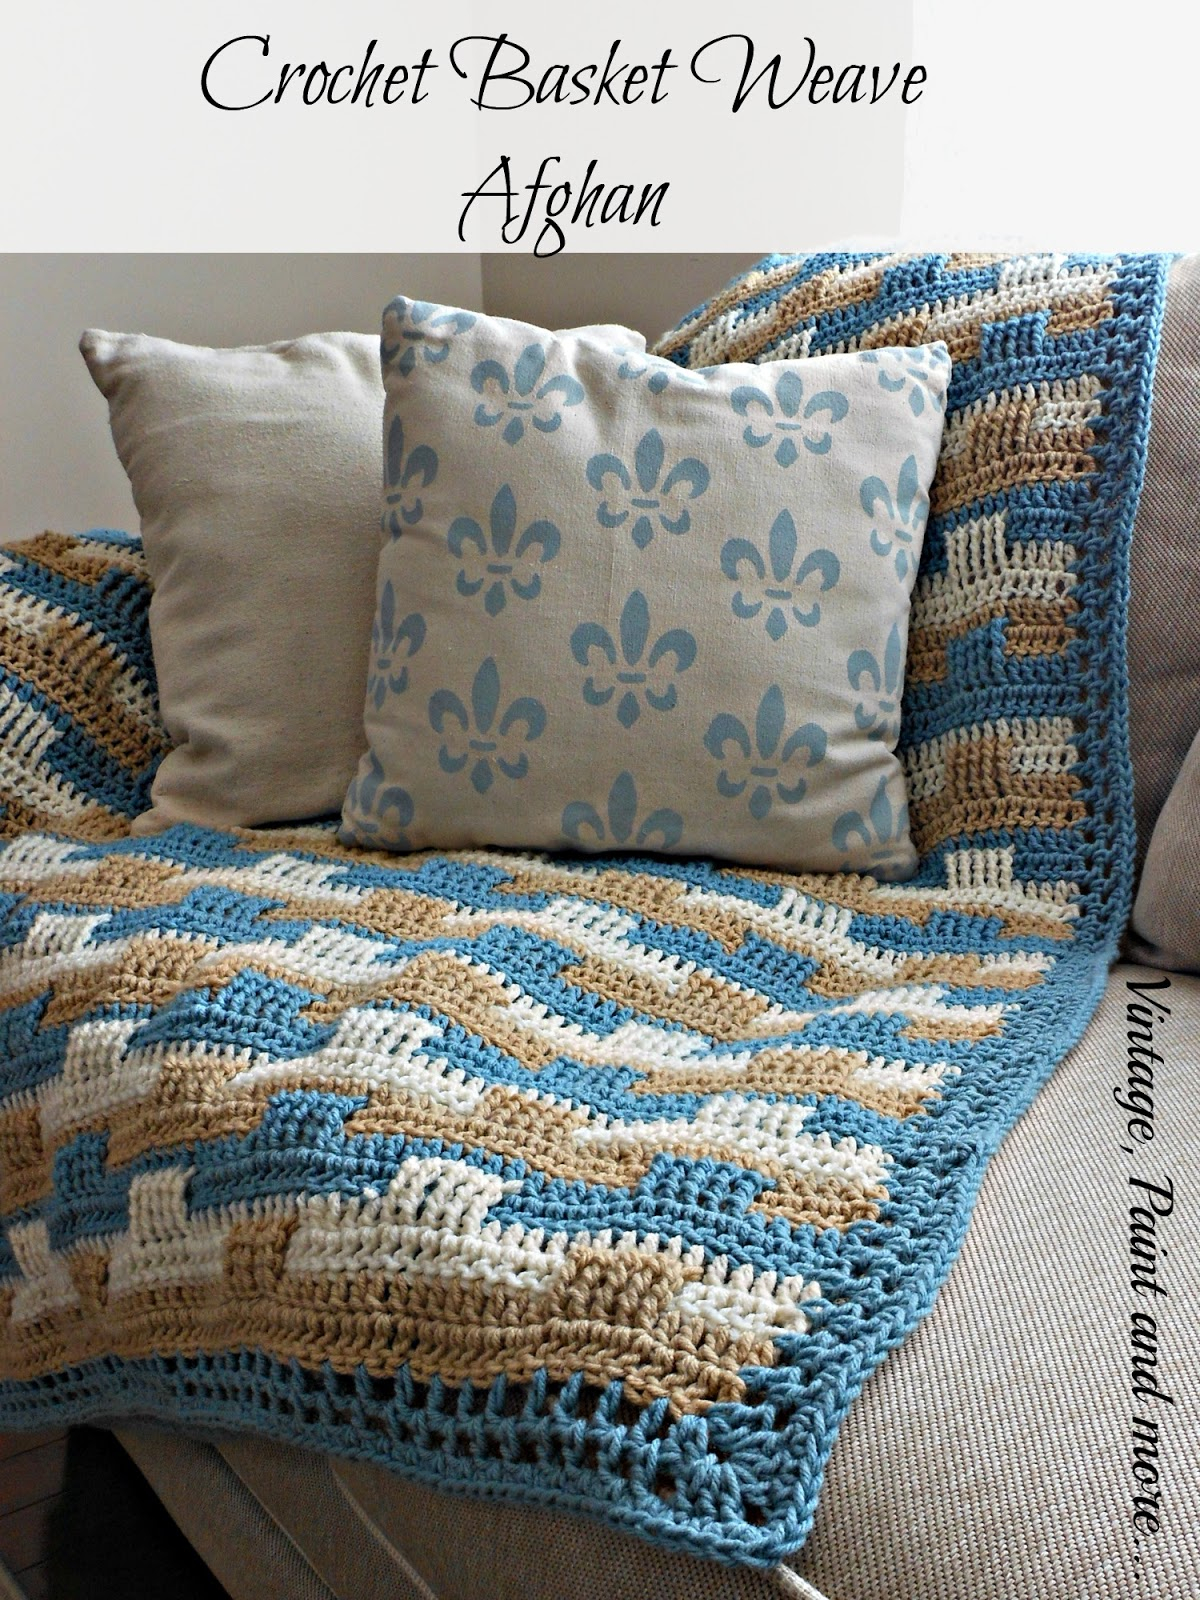 Basket Weave Crochet Pattern Afghan Crochet Afghan And Stenciled Pillow Vintage Paint And More